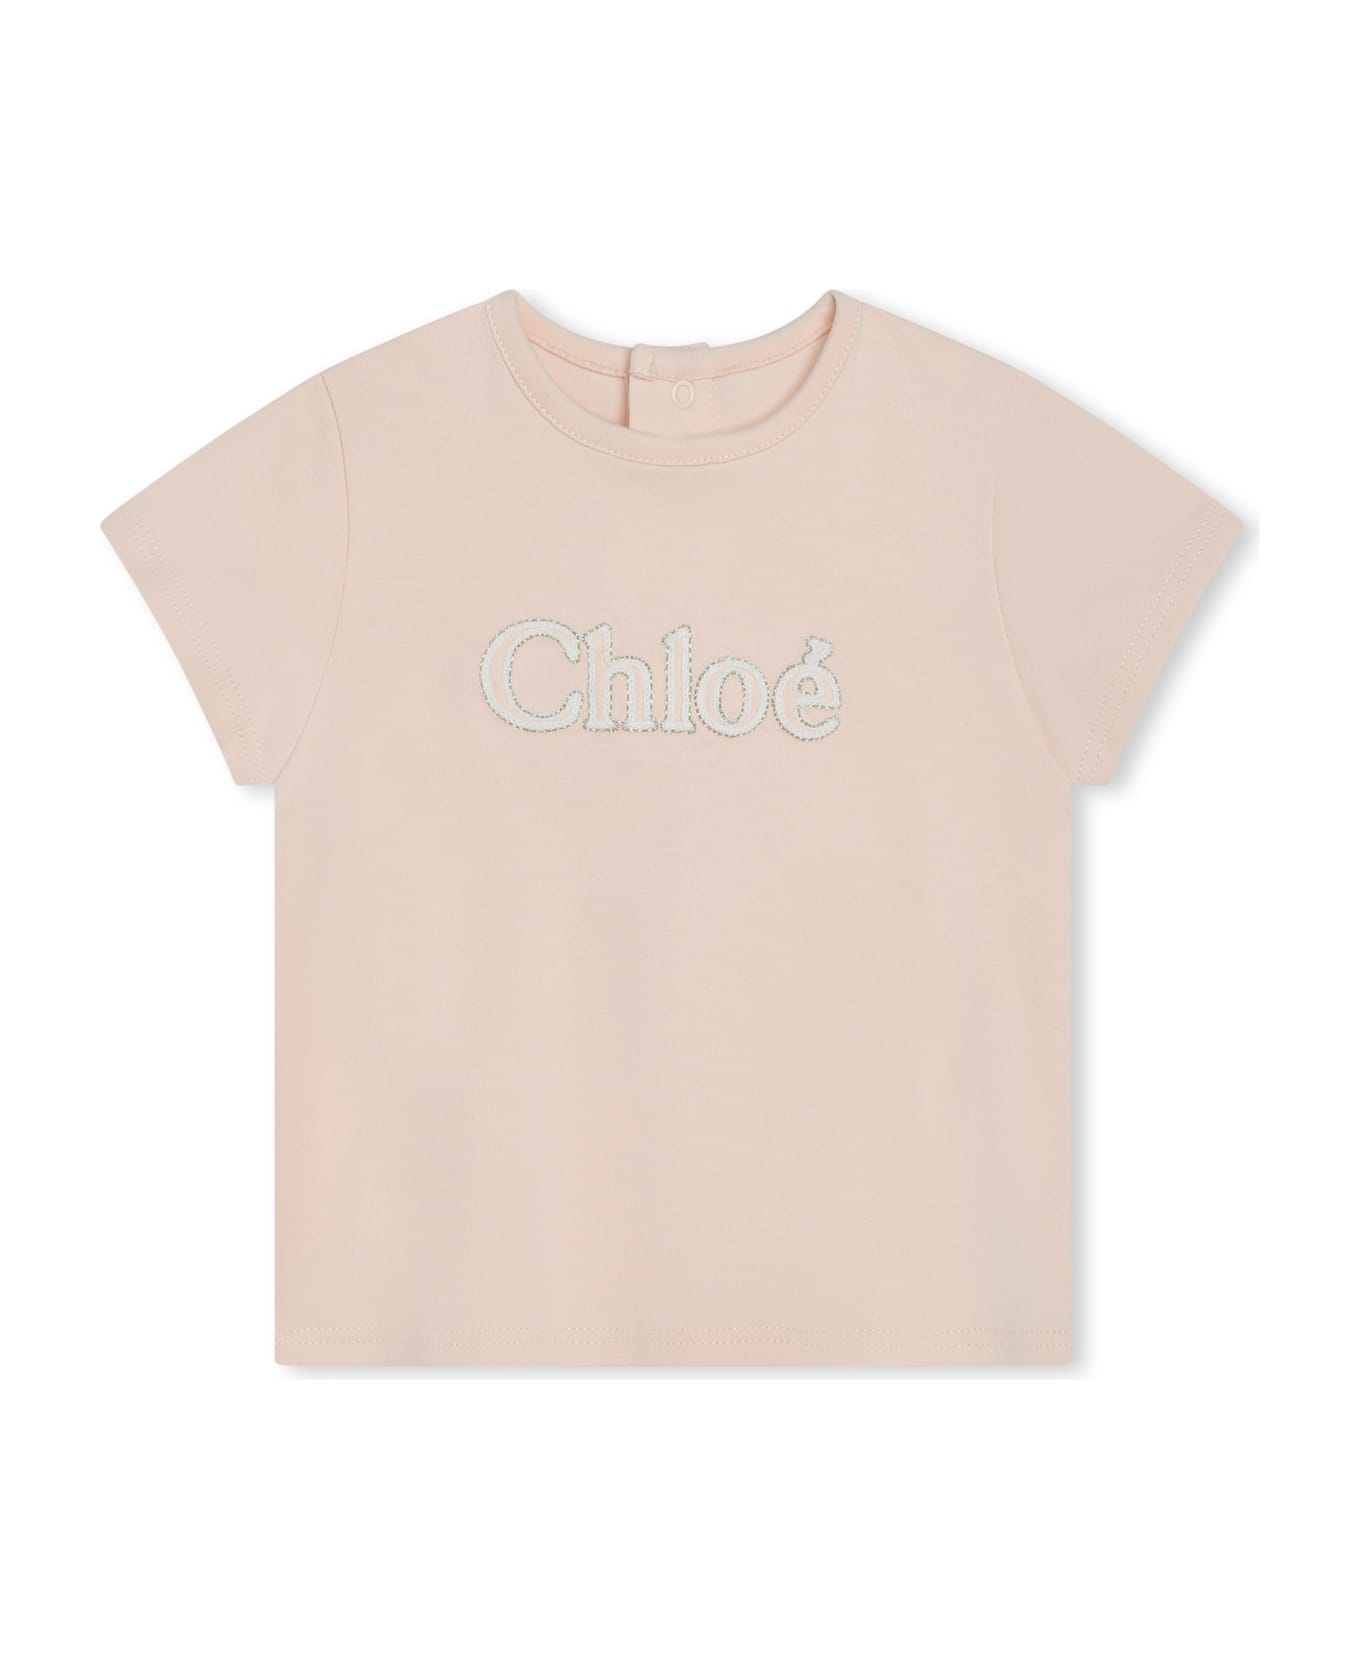 Chloé T-shirt With Embroidery - Pink